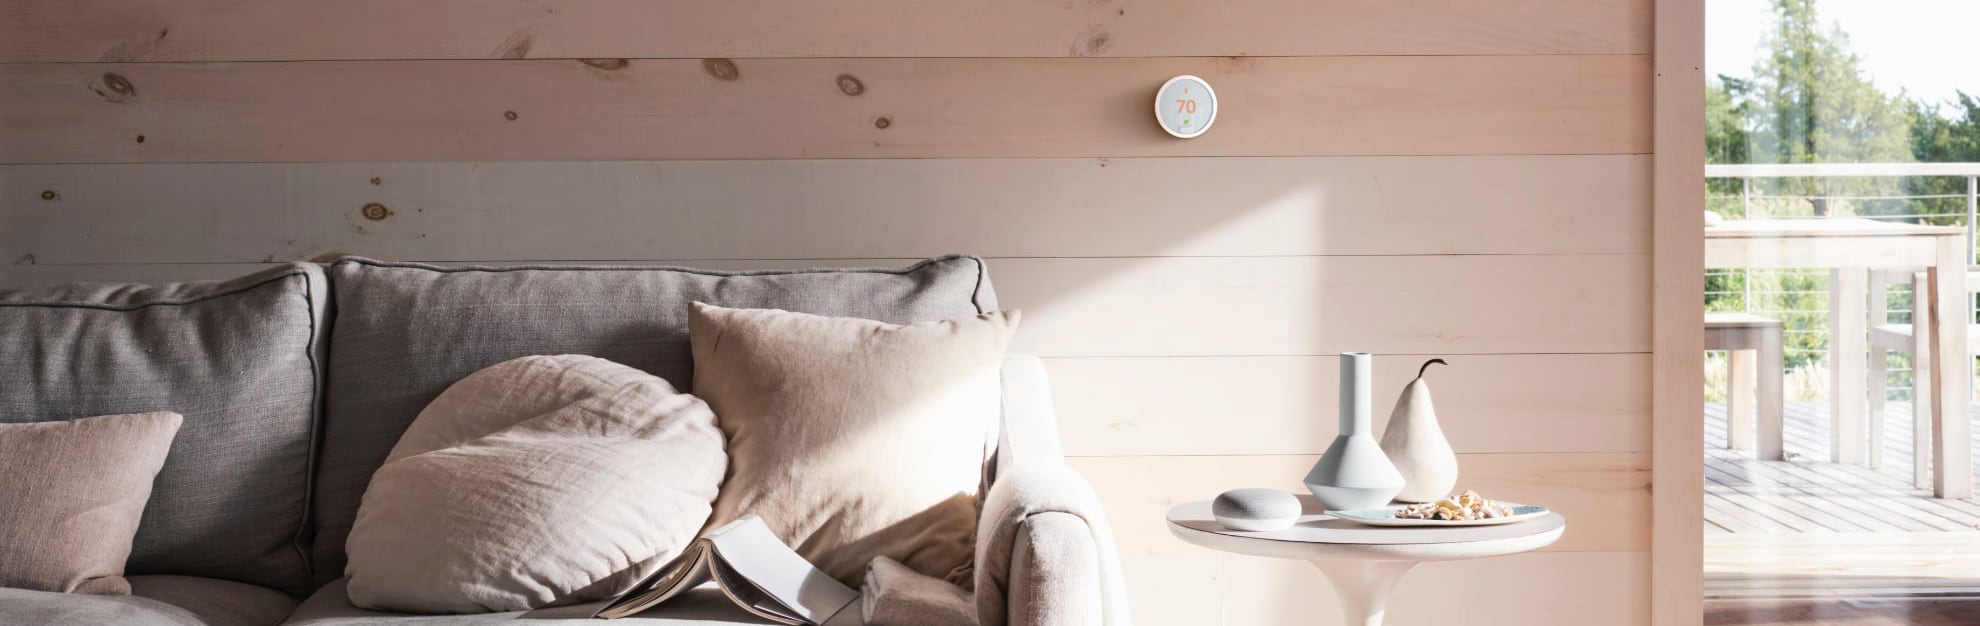 Vivint Home Automation in Riverside